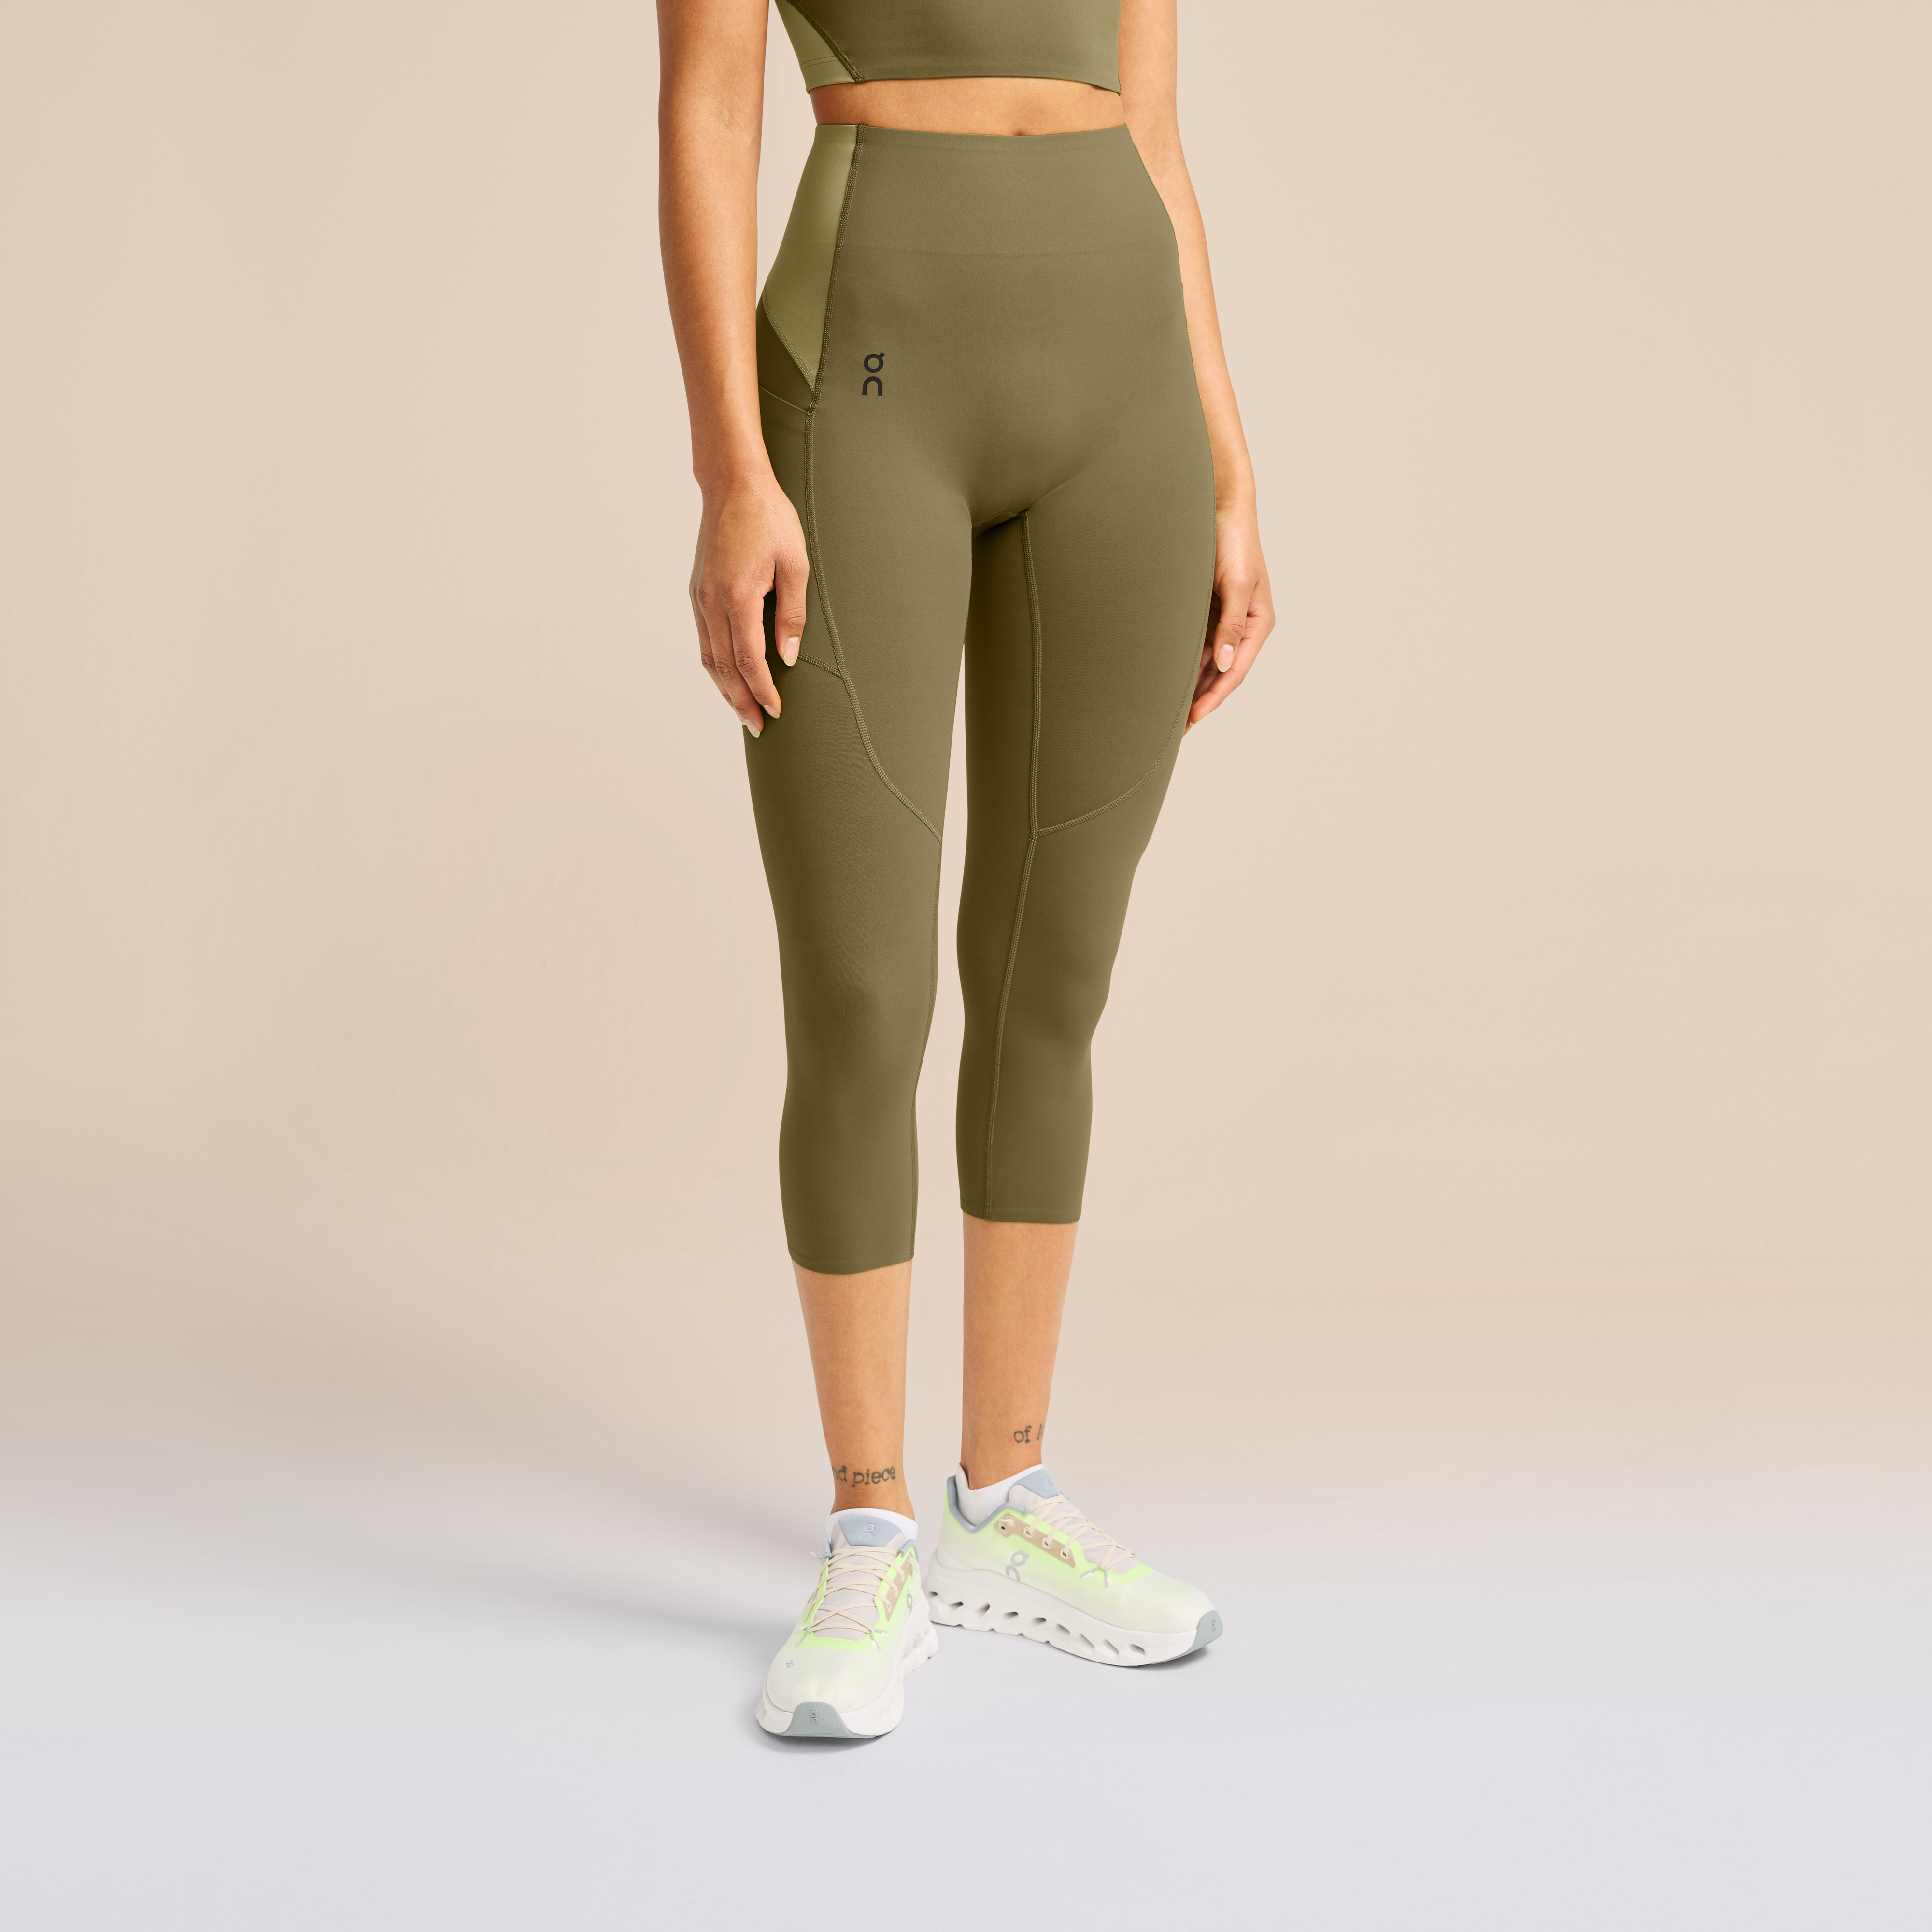 On Movement 3/4 Tights Green Women All-day, low-intensity workouts, ultra-soft. Tights